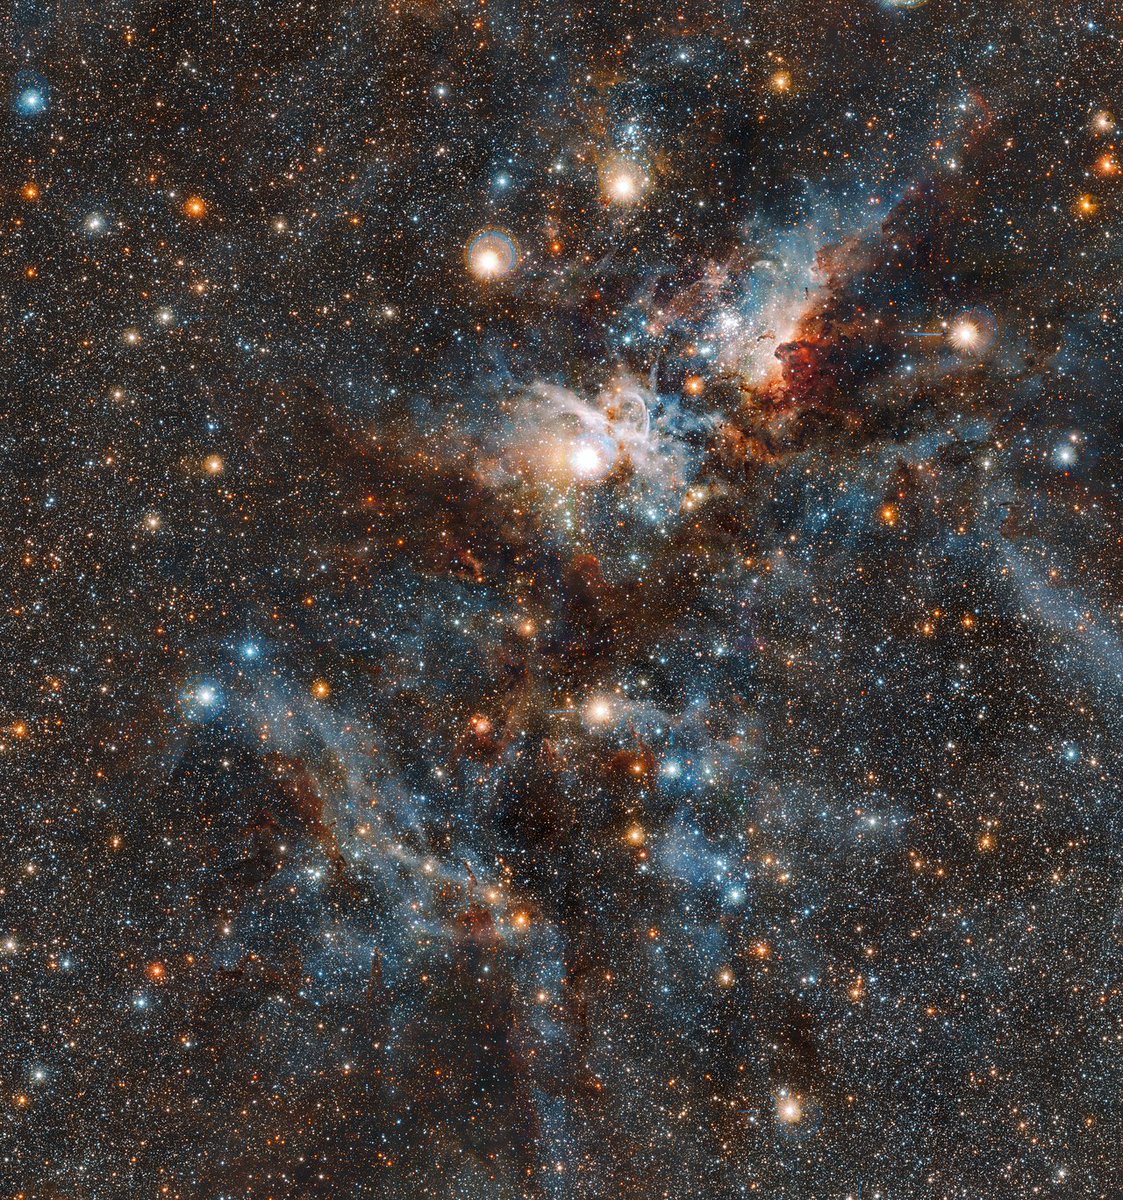 Stunning: the Carina Nebula as seen in infrared light This spectacular image of the Carina nebula reveals the dynamic cloud of interstellar matter and thinly spread gas and dust as never before. (Credit: ESO/J. Emerson/M. Irwin/J. Lewis)